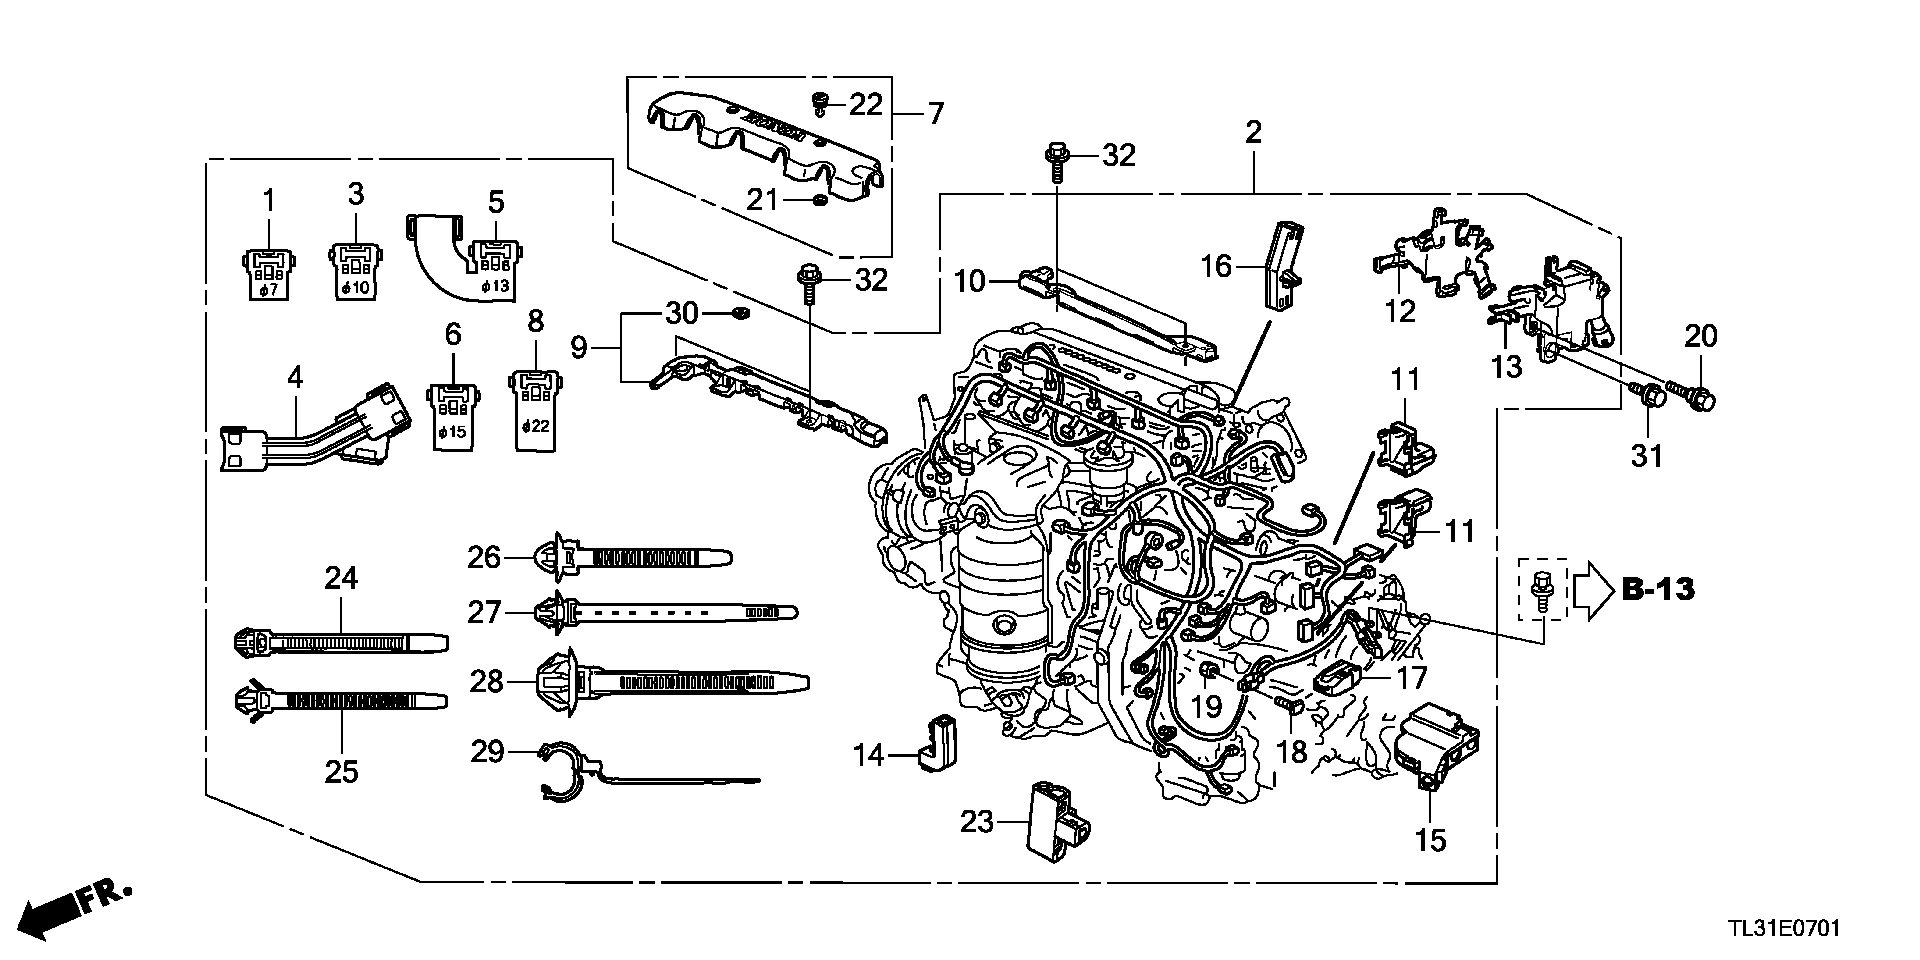 ENGINE WIRE HARNESS(2.0L)